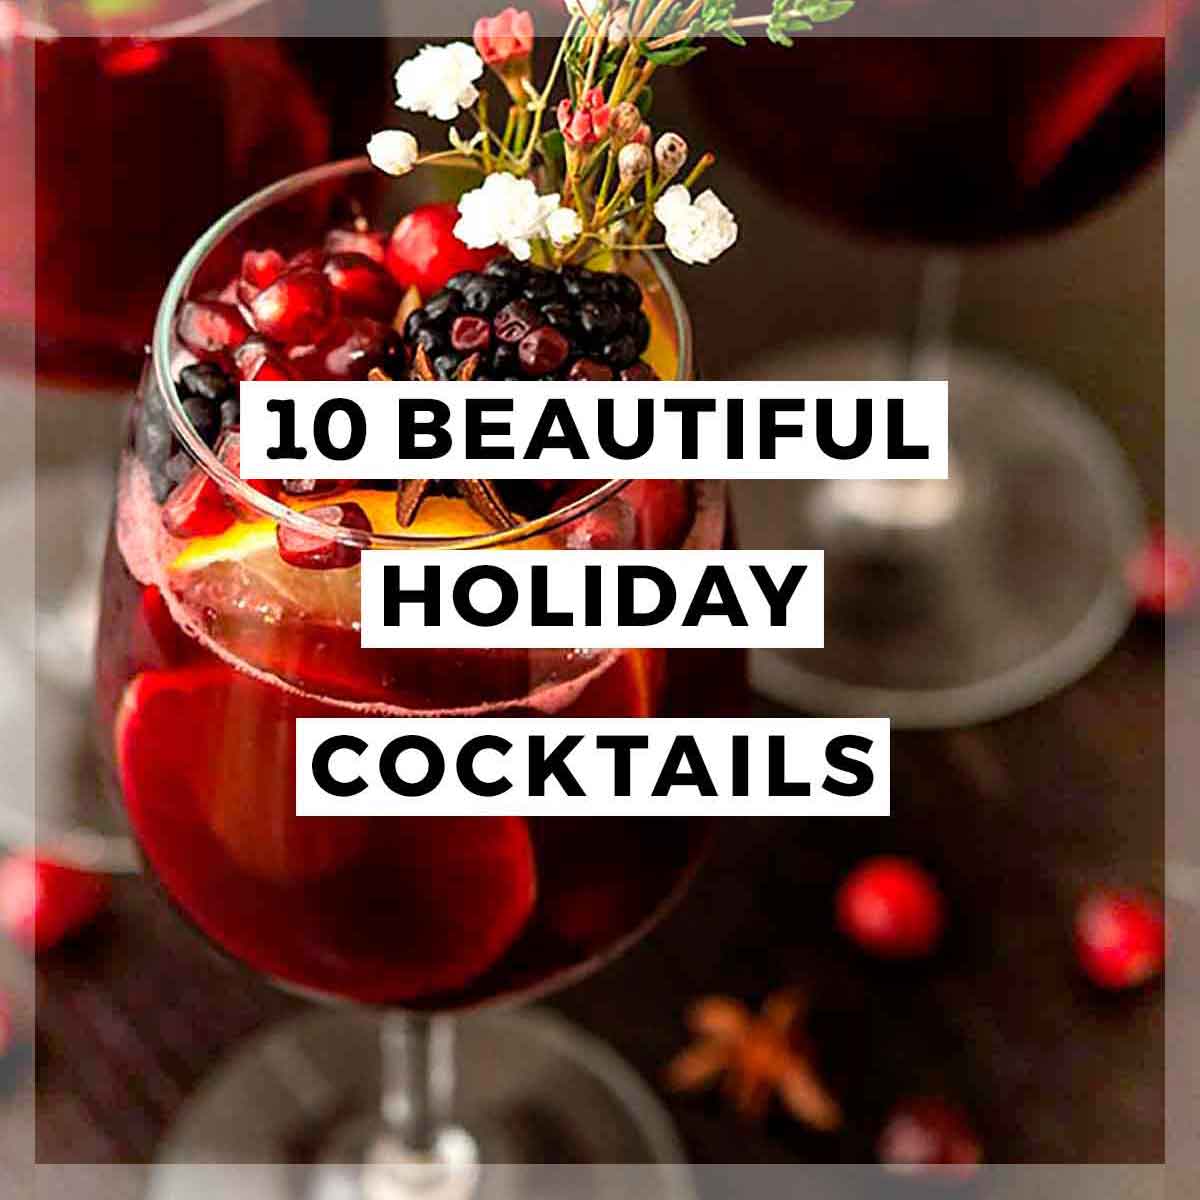 A flamboyantly garnished cocktail with a title that says "10 Beautiful Holiday Cocktails."